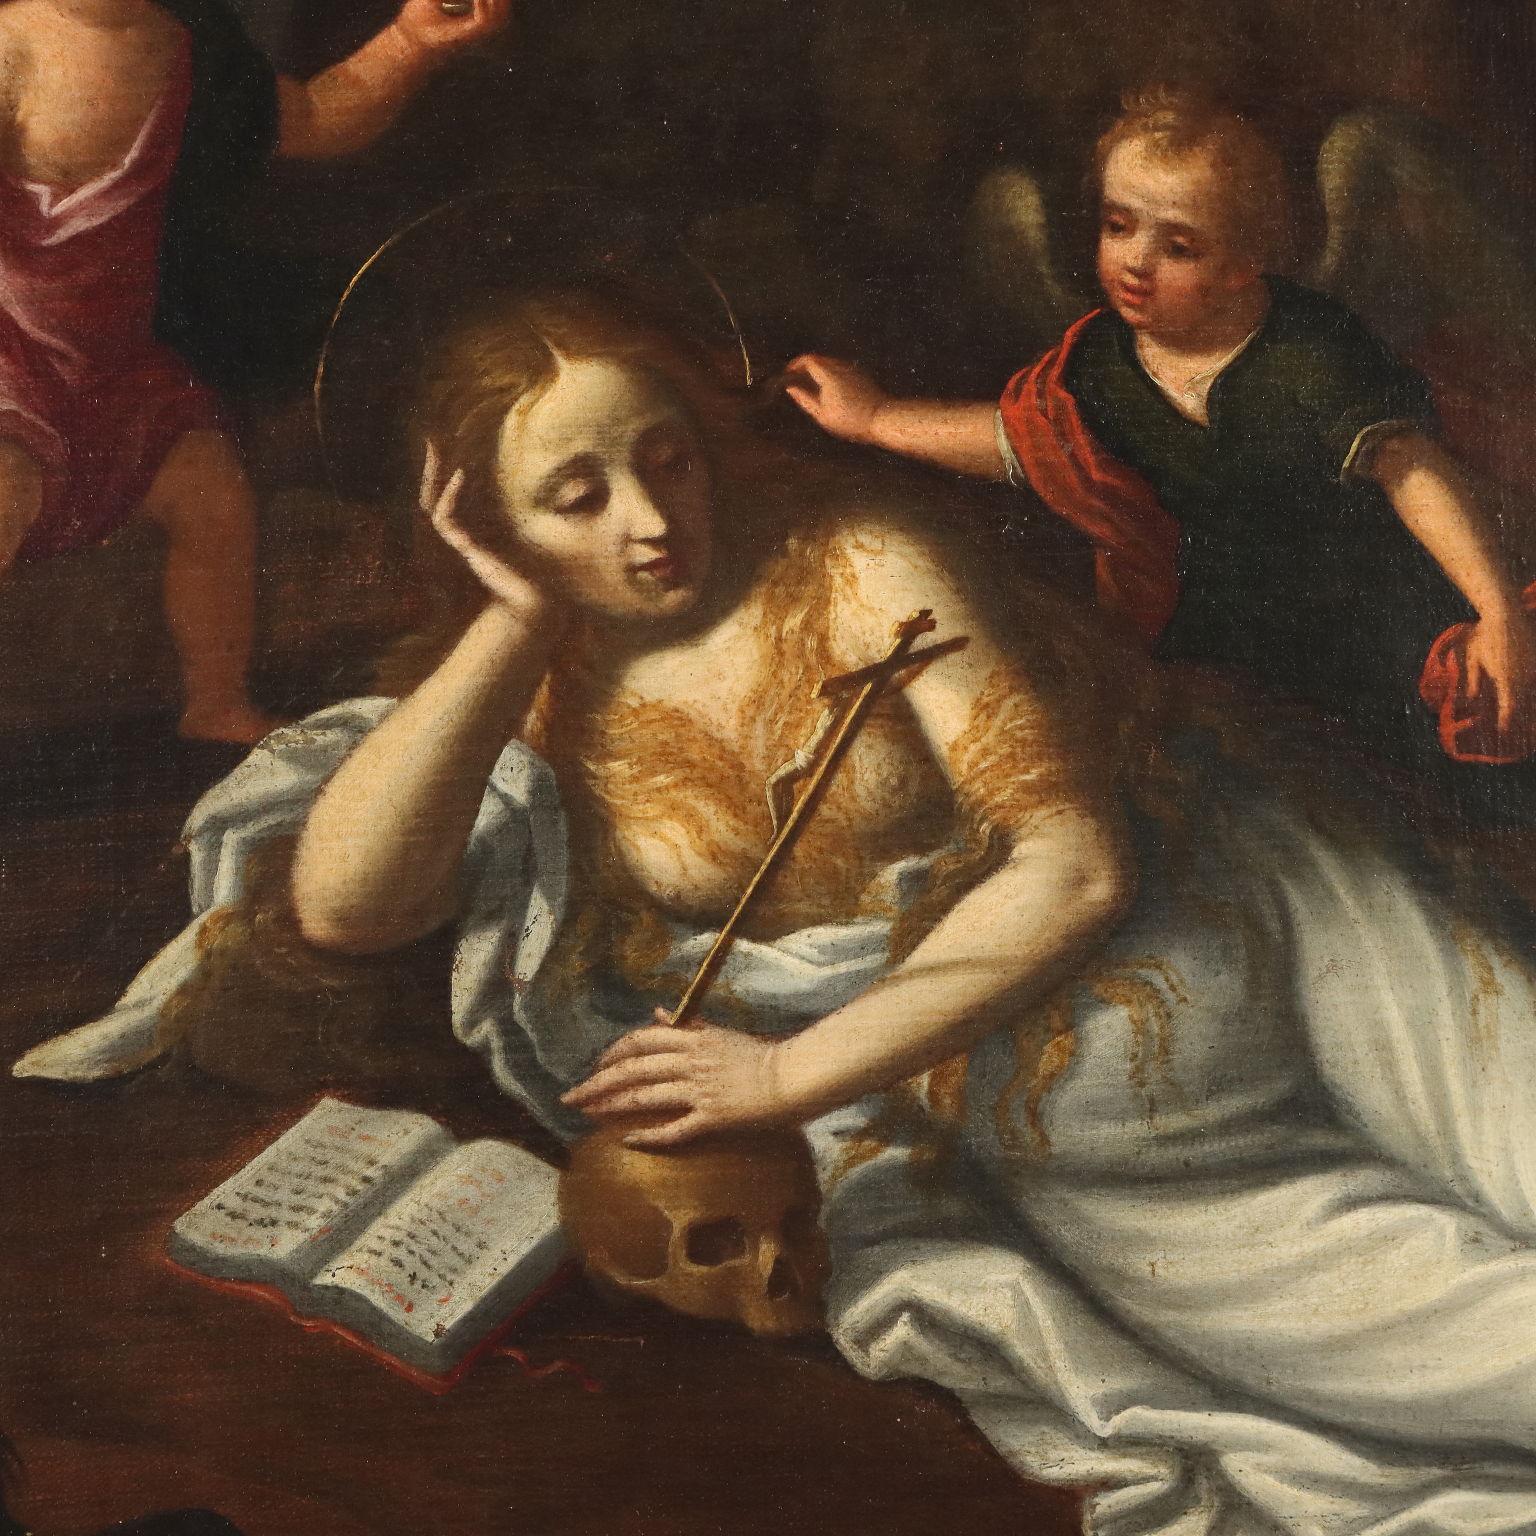 Oil on Canvas. Italian school of the 17th-18th centuries.
Magdalene is depicted inside a cave, stretched out on the ground in a pose of soft abandon, partially covered by a white cloth and with her long, loose hair covering her bare breasts,